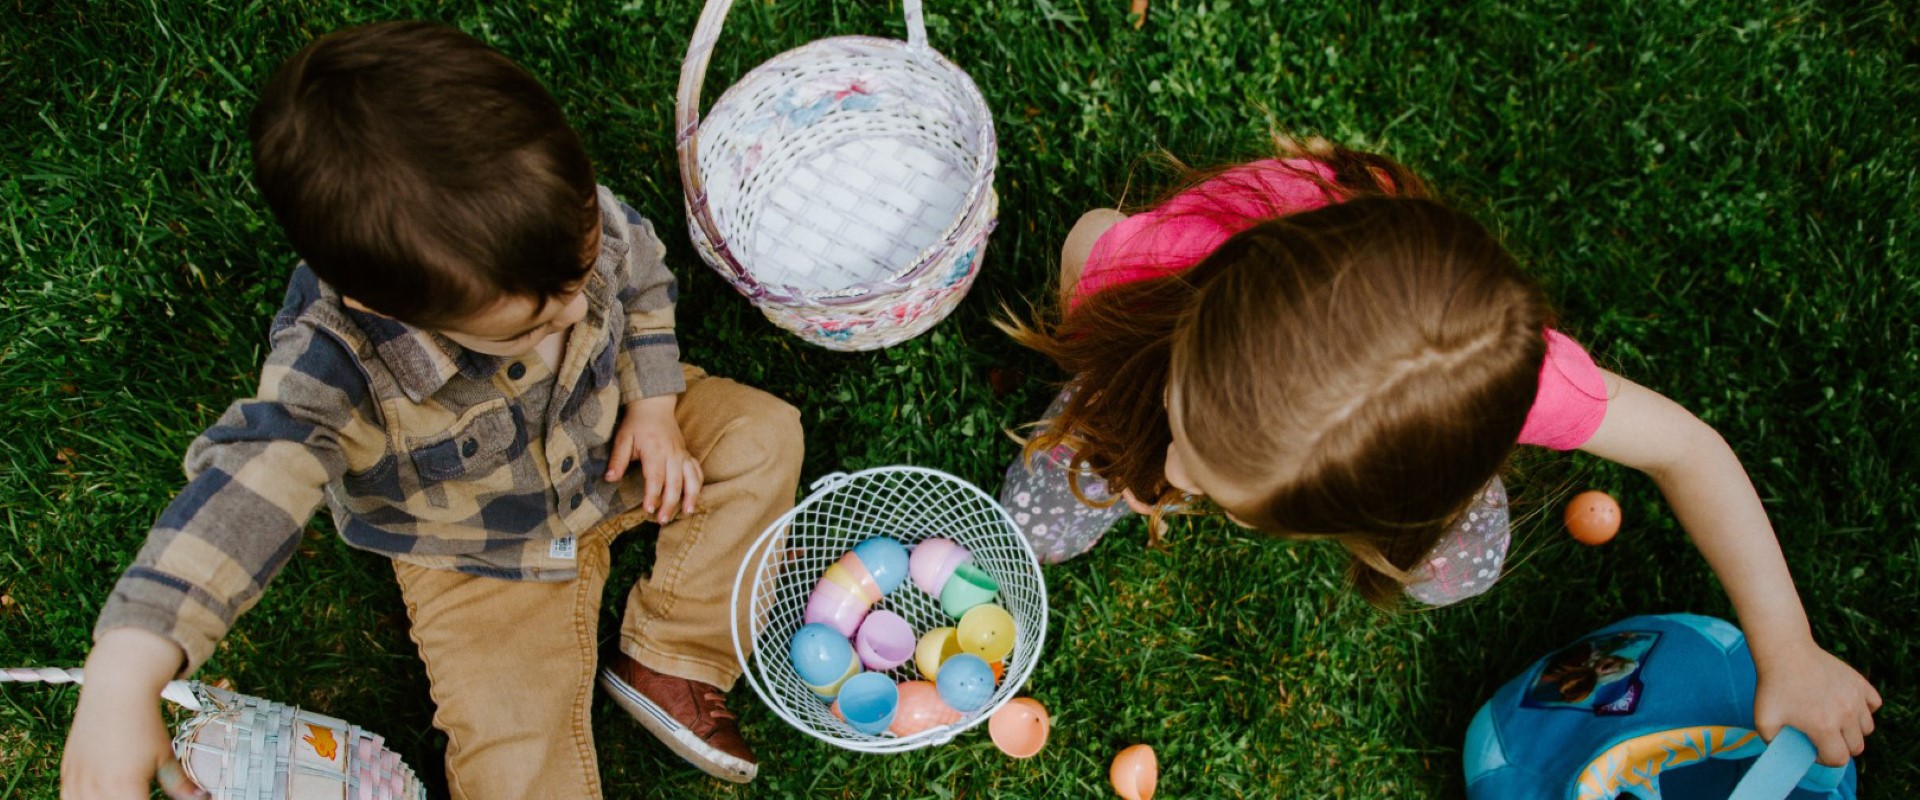 article image: Easter holidays 2023 in Portugal. Pictured are two children on the grass during an egg hunt activity.